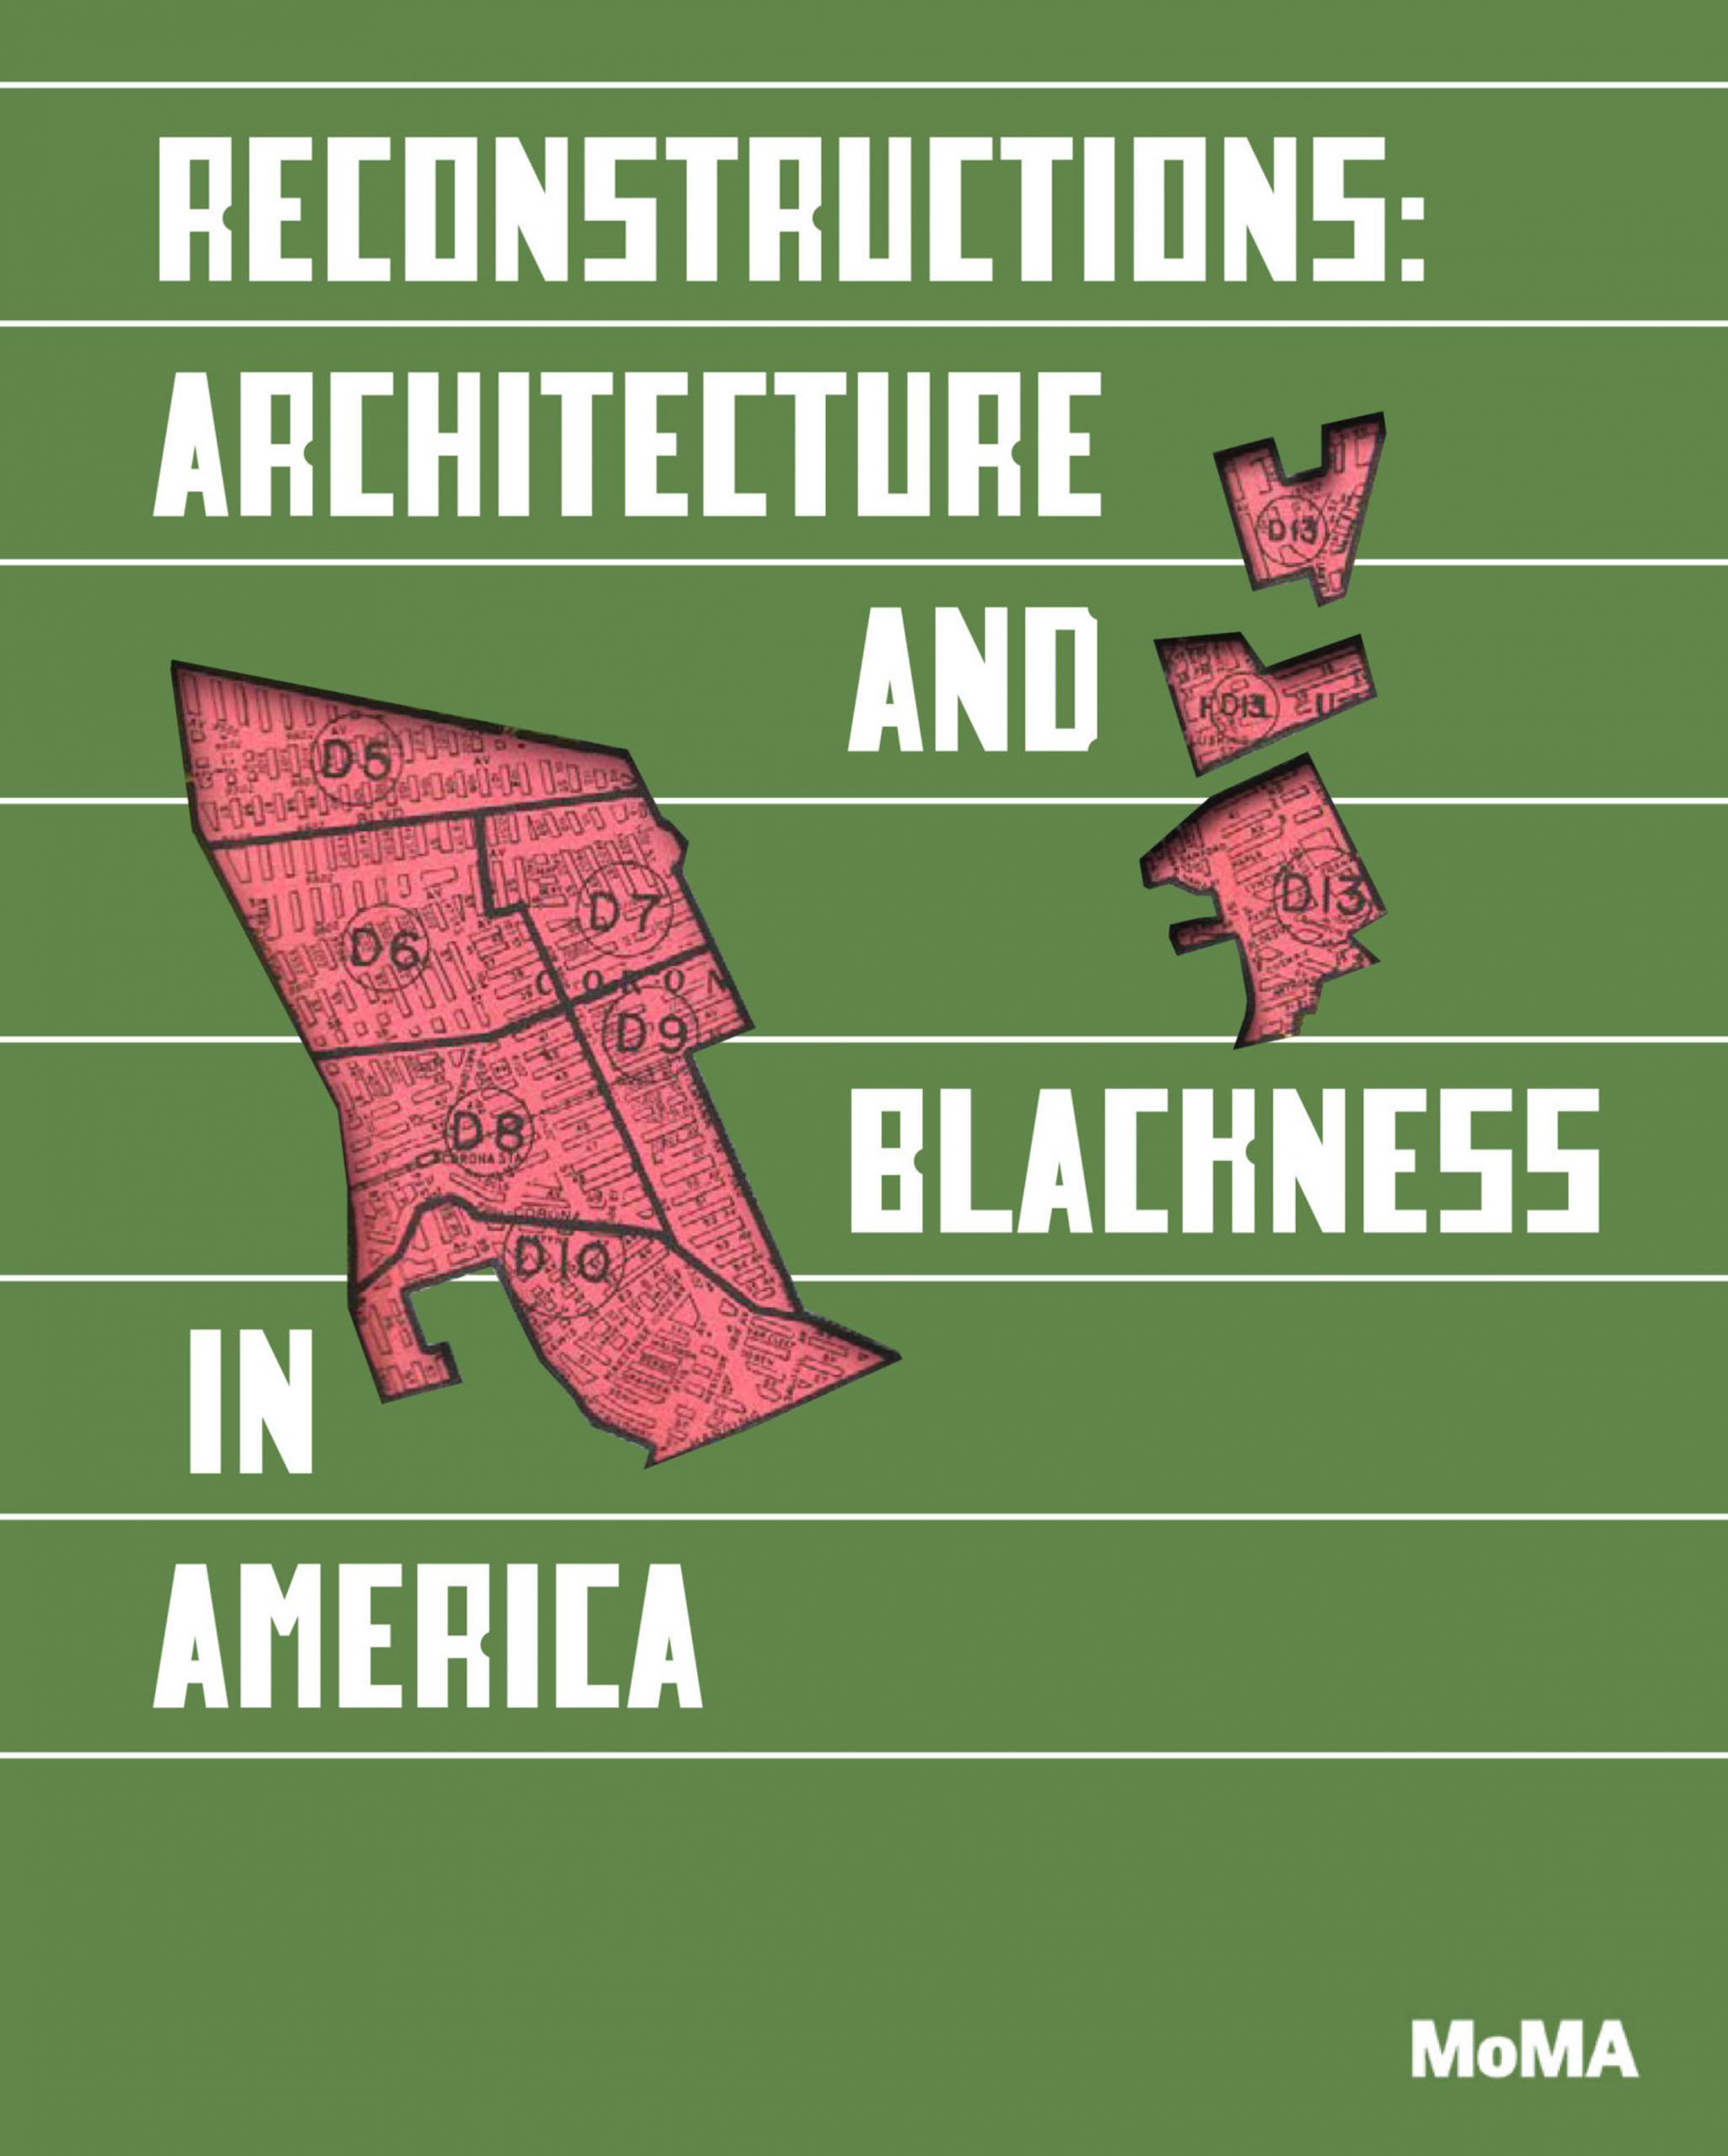 Poster of MoMA's Reconstructions: Architecture and Blackness in America exhibition from Dezeen Events Guide February